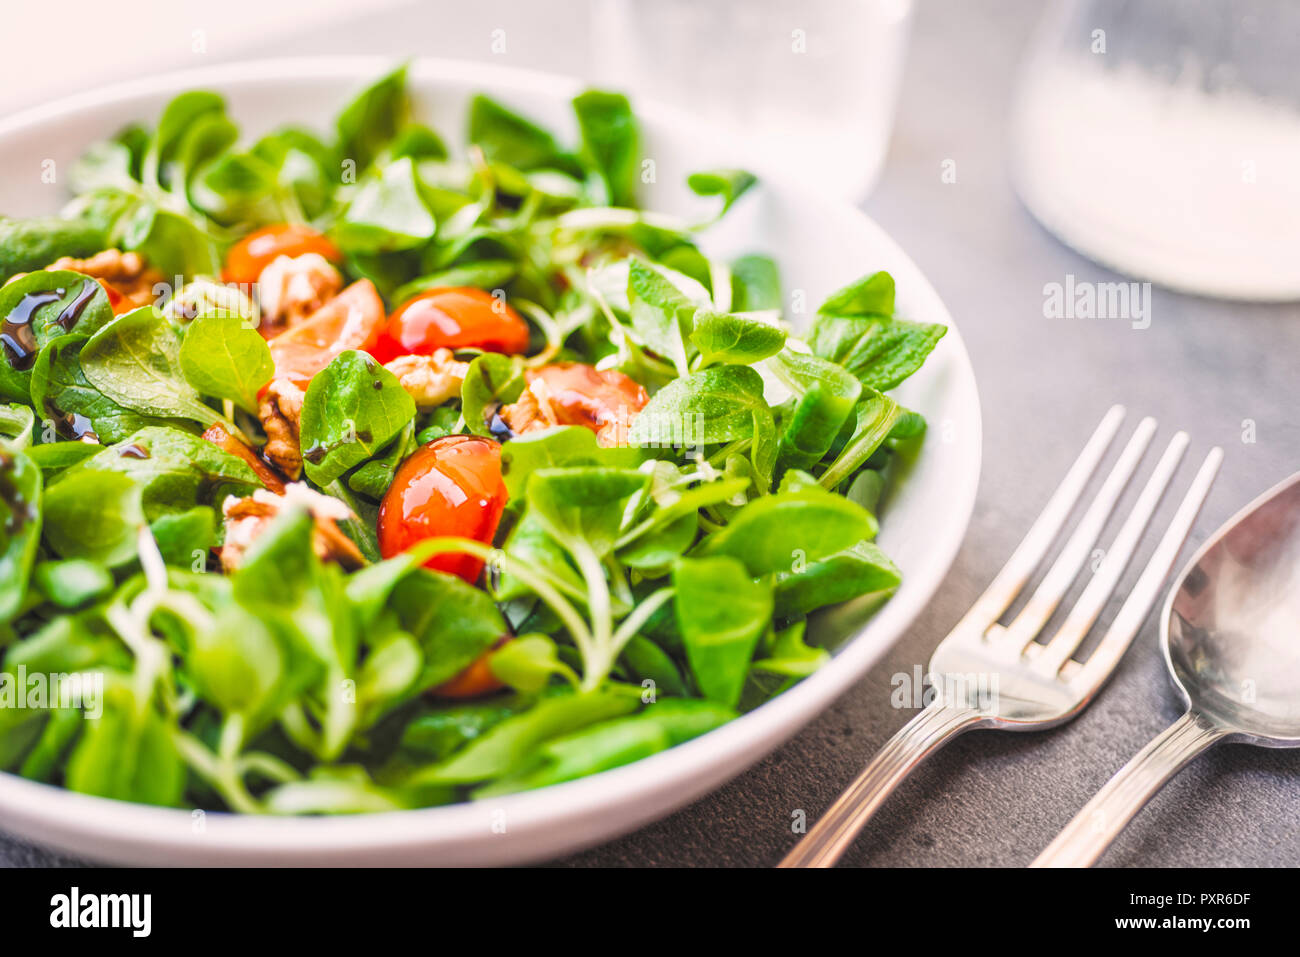 Lamb's lettuce with tomatoes and walnuts Stock Photo